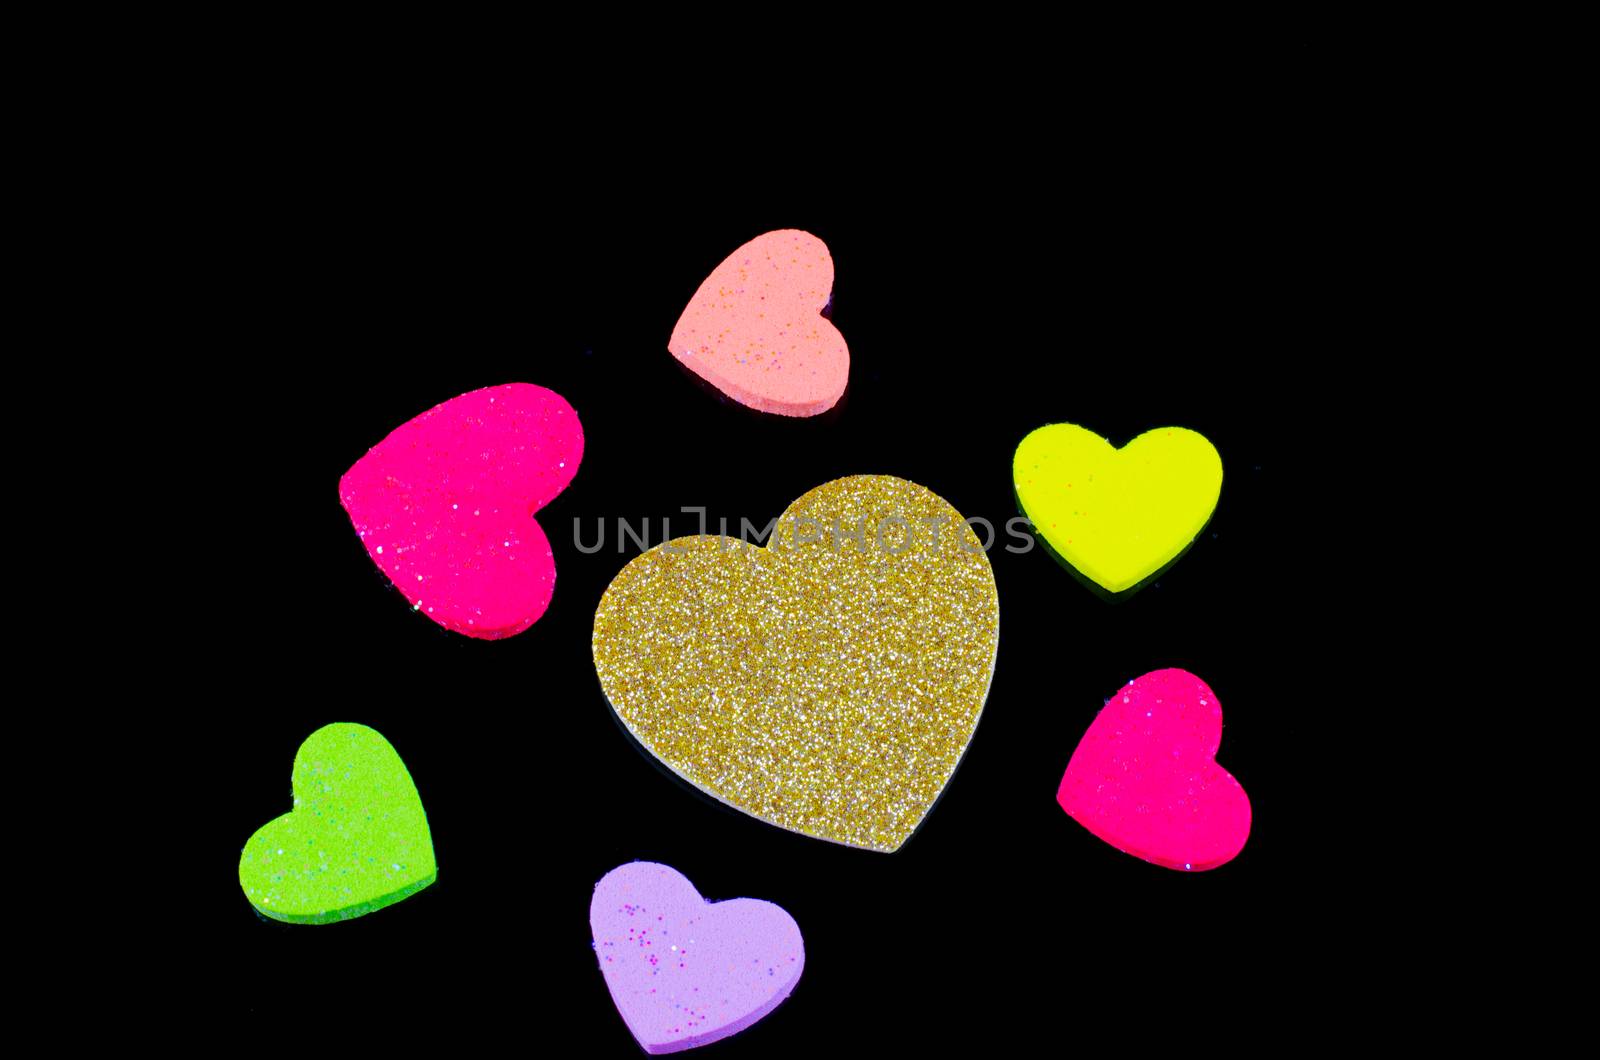 Heart of gold many colors Black background